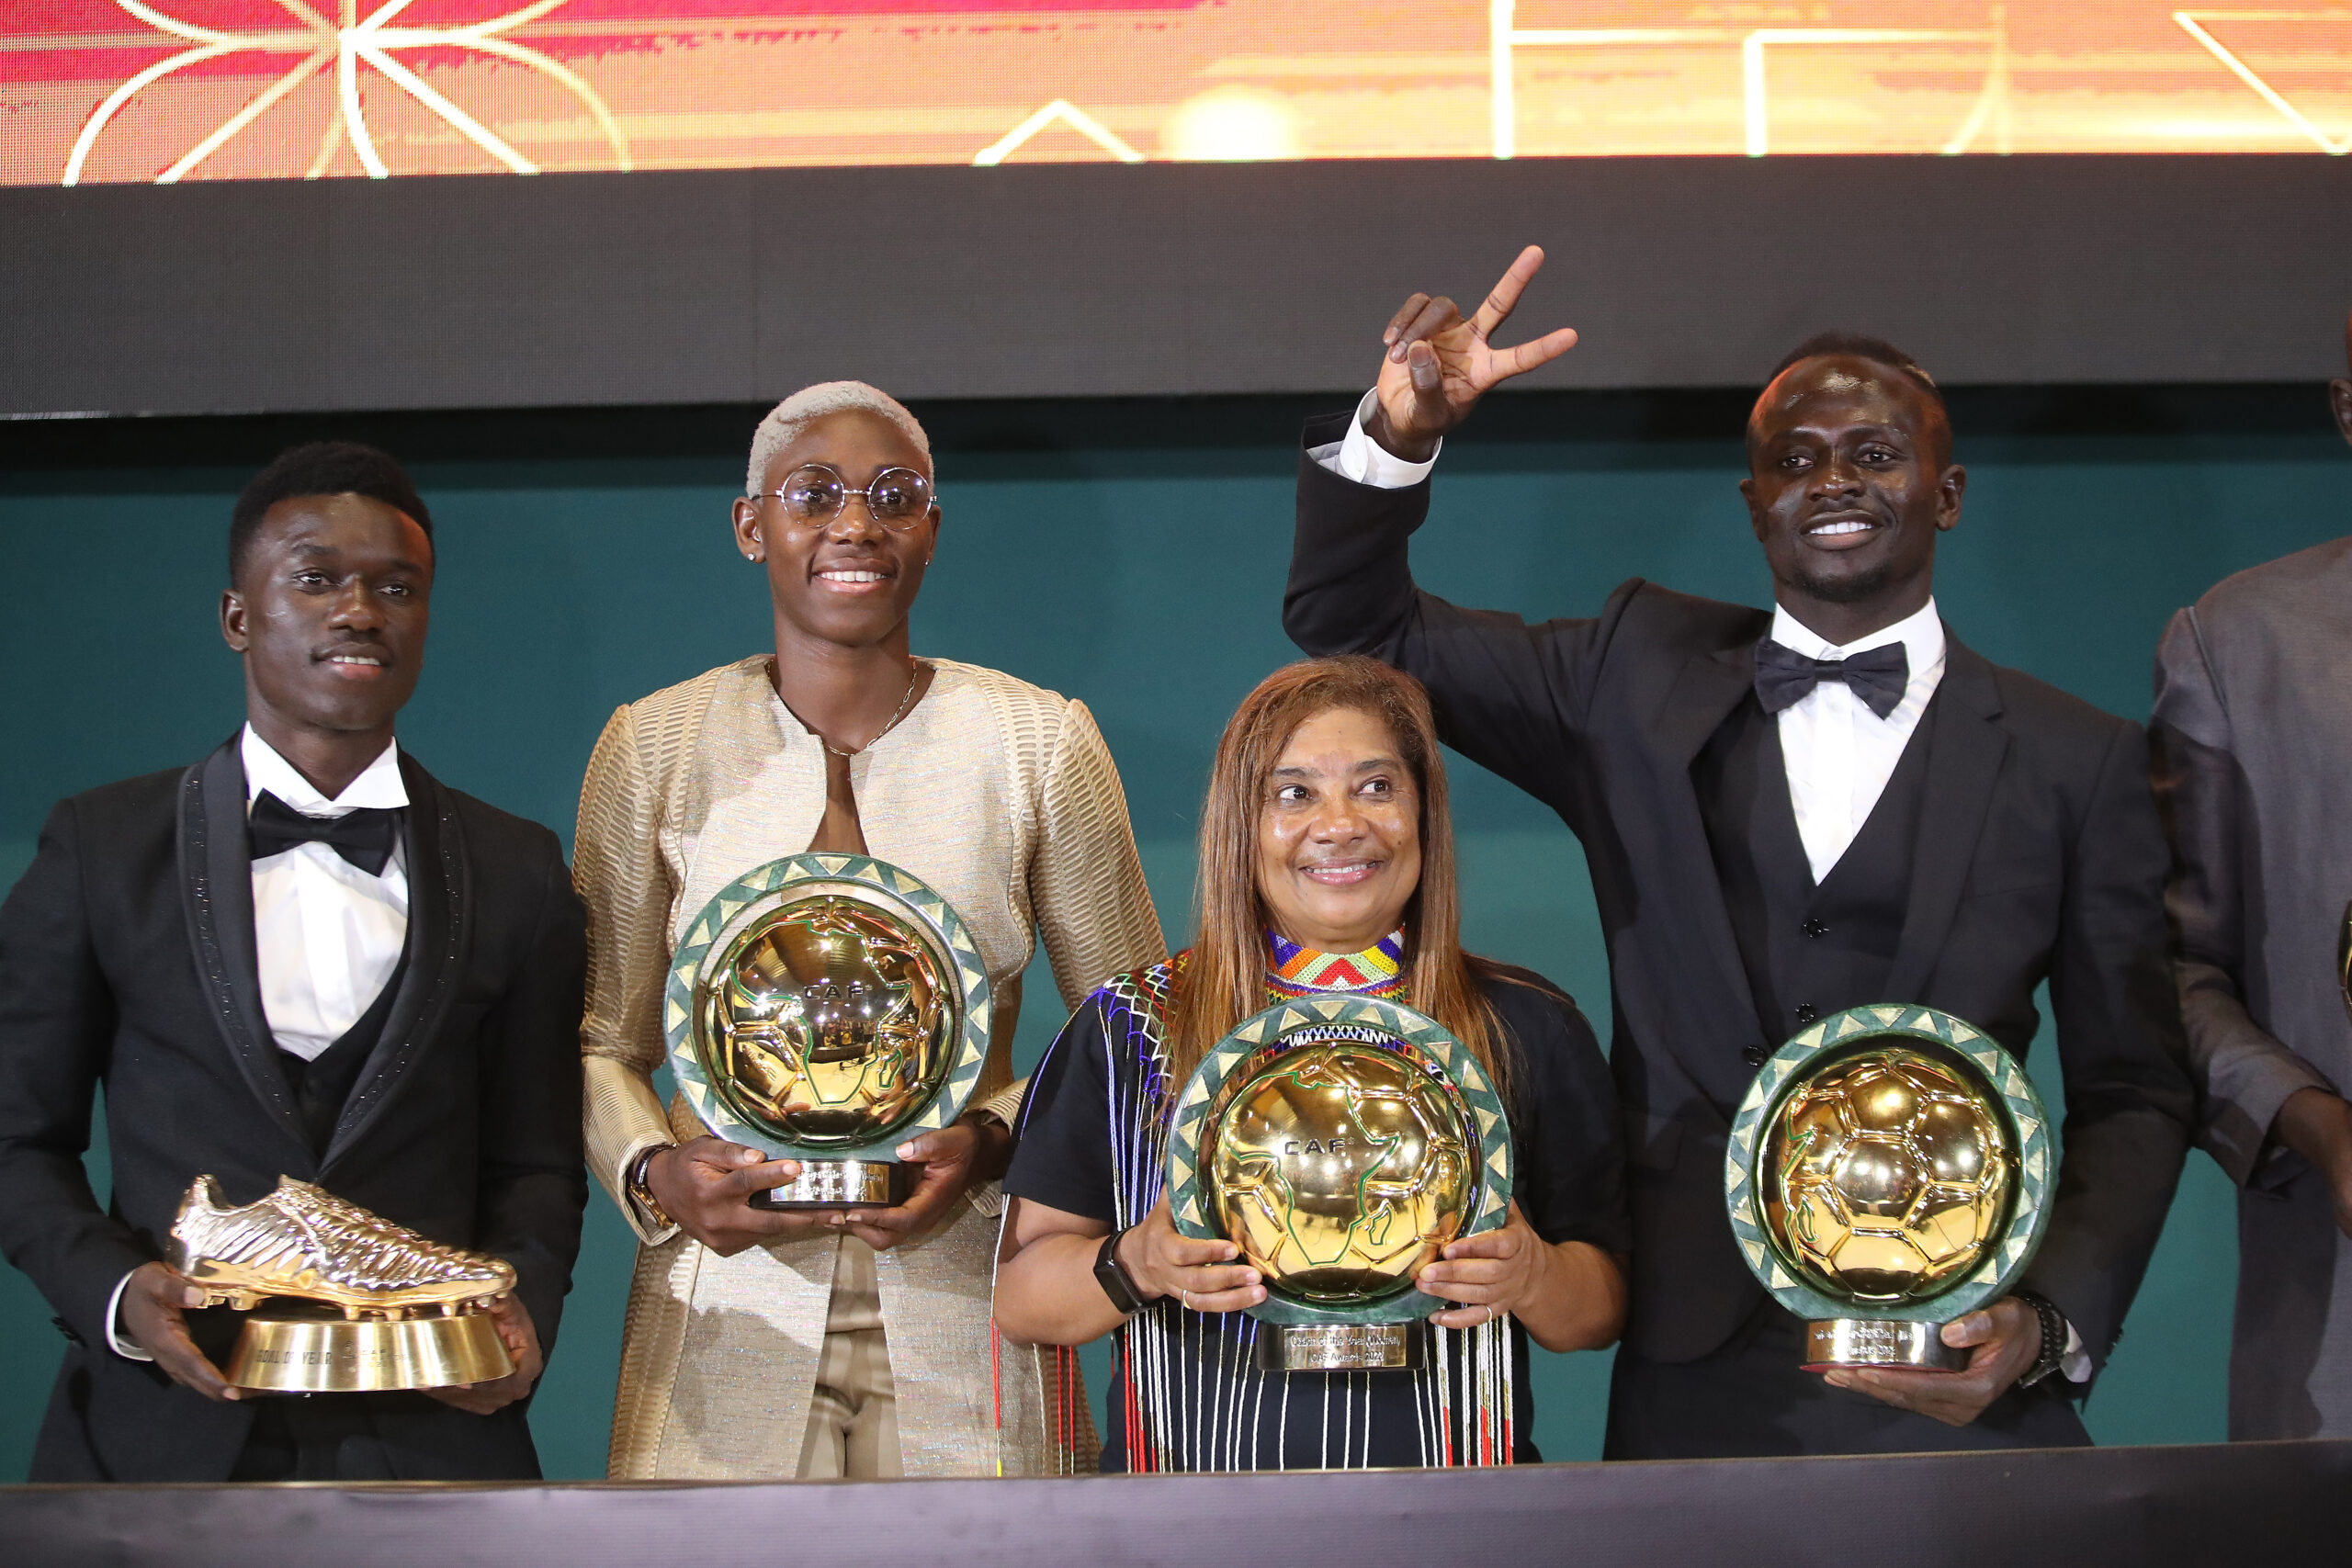 Goal of the Year Winner Pape Ousmane Sakho of Senegal & Simba, Womens African Player of the Year Asisat Oshoala of Nigeria, Womens coach of the Year Desiree Ellis of South Africa and Mens African Player of the Year Sadio Mane of Senegal at the press conference during the 2022 CAF Awards held at Mohammed VI Complex in Sale, Morocco on 21 July 2022©Weam Mostafa/BackpagePix